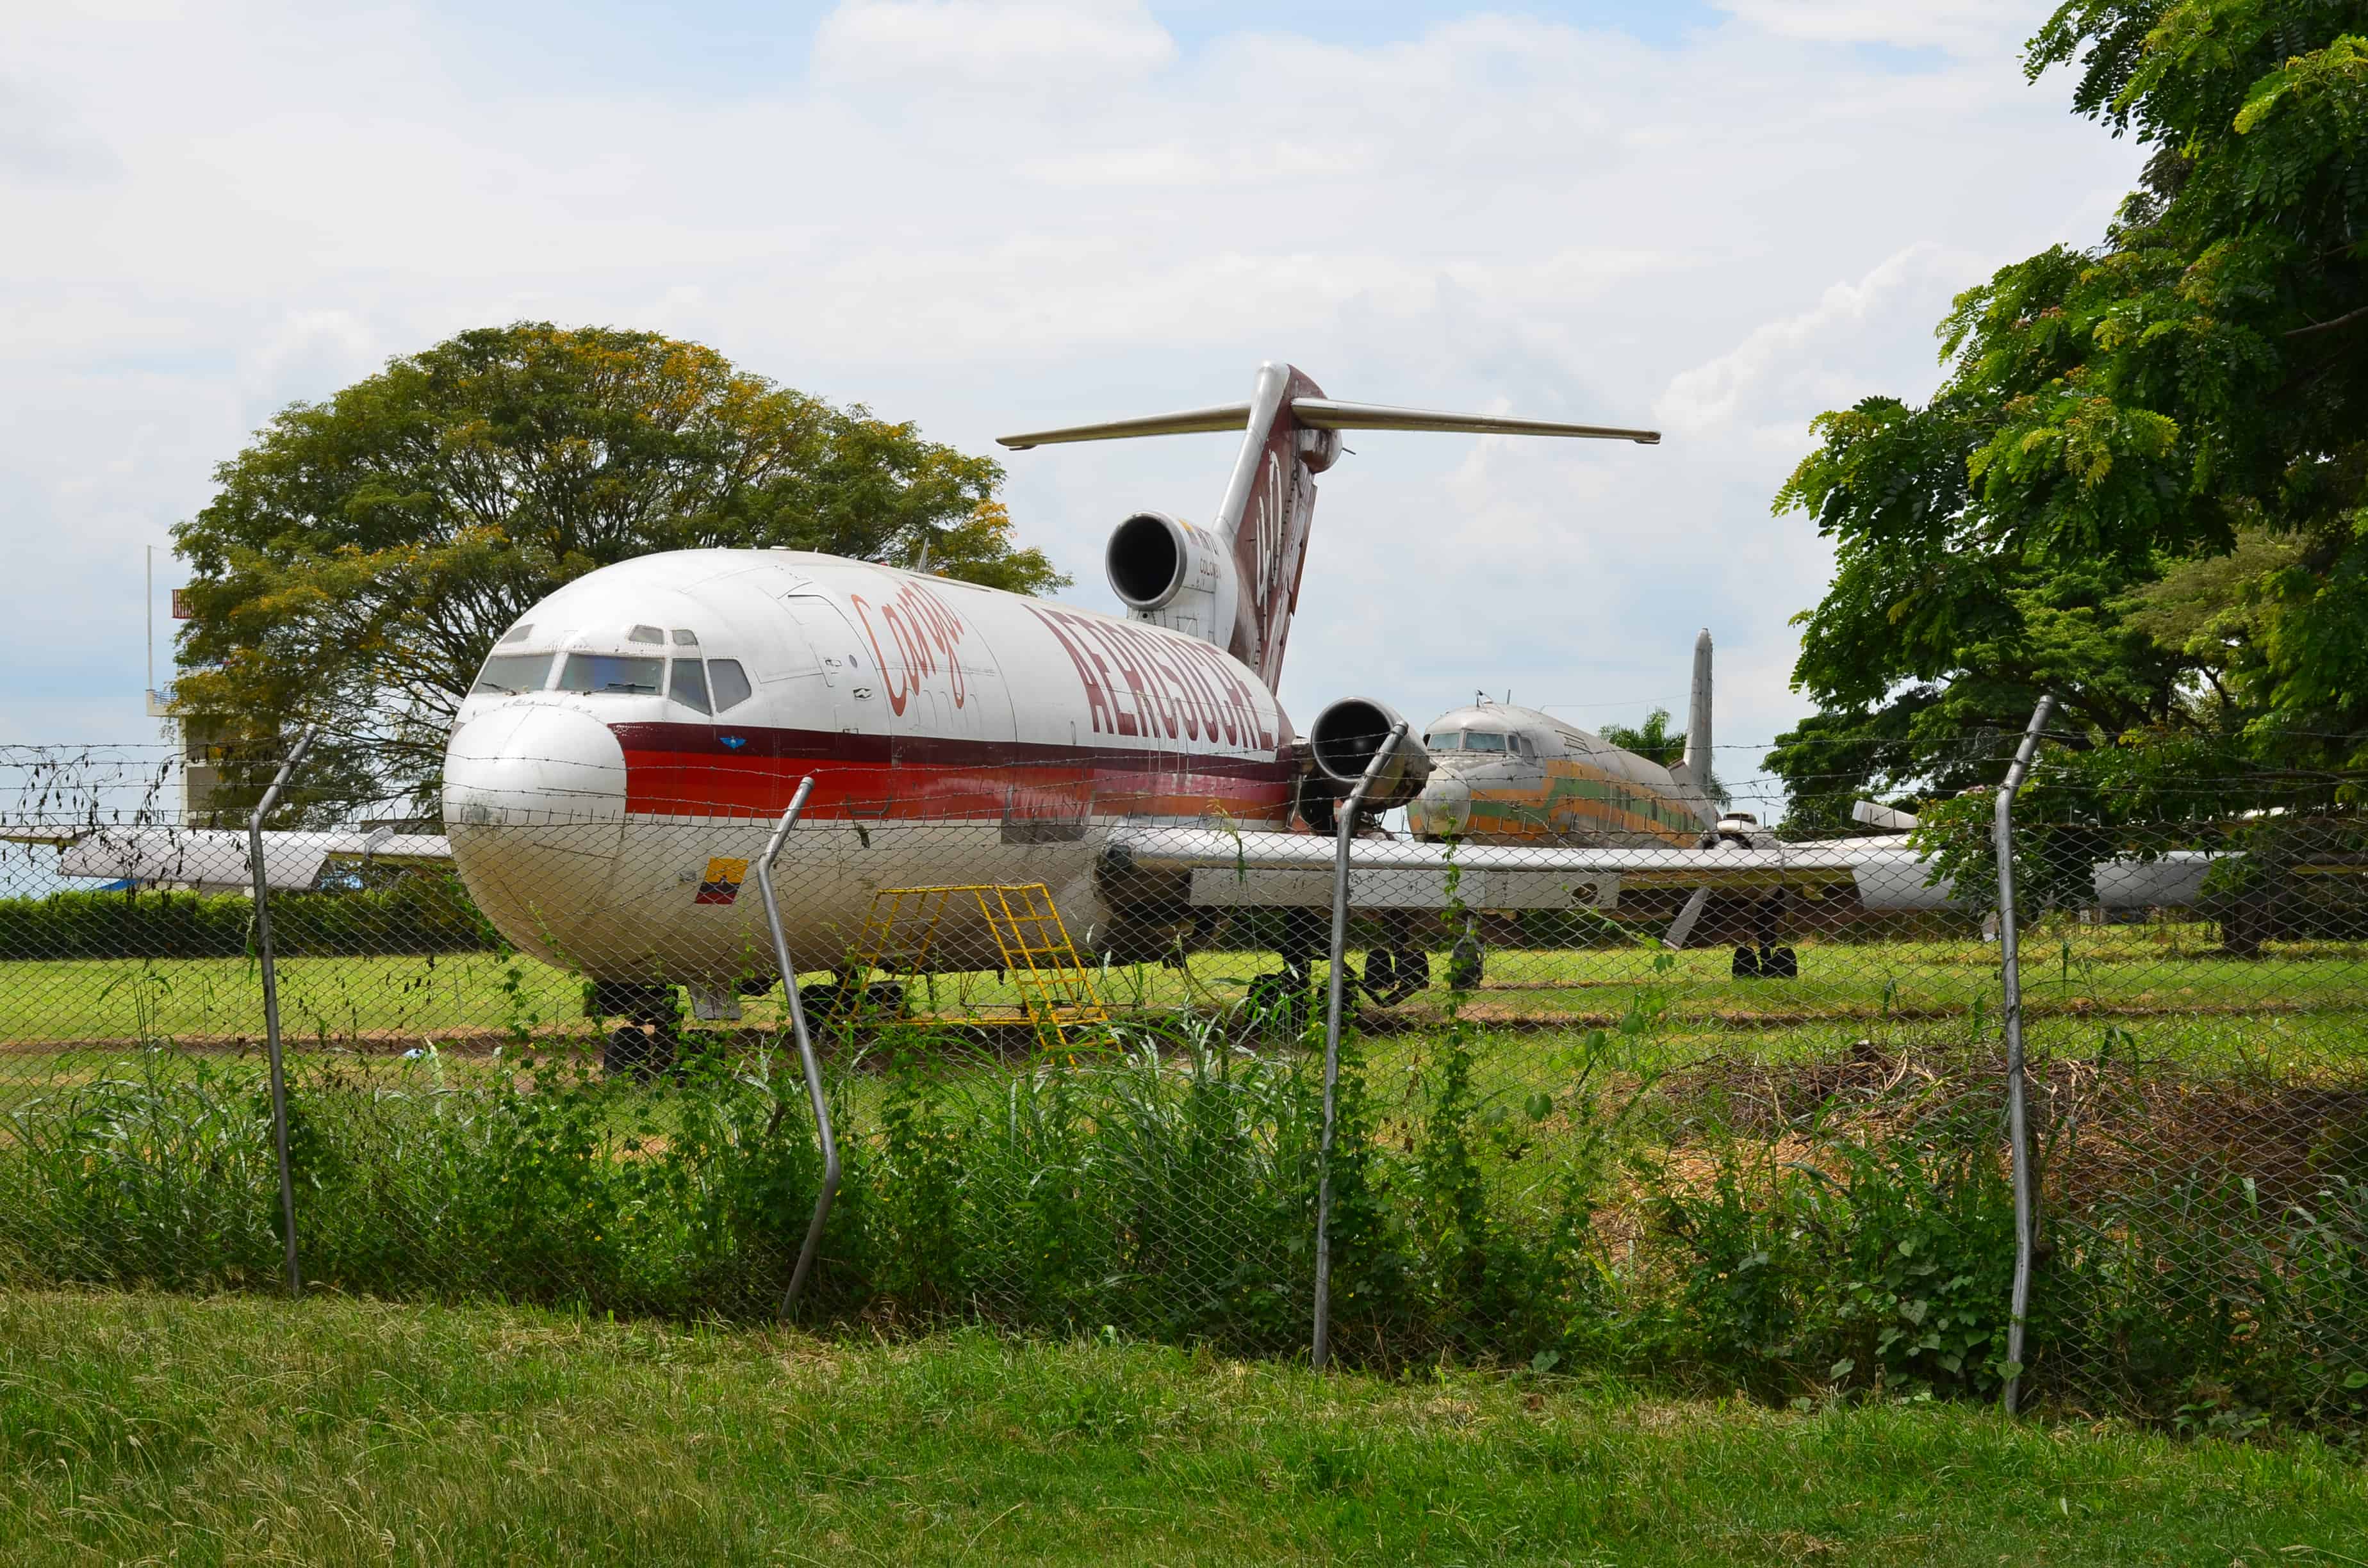 AeroSucre Boeing 727-100 at Fénix Air Museum in Palmira, Valle del Cauca, Colombia